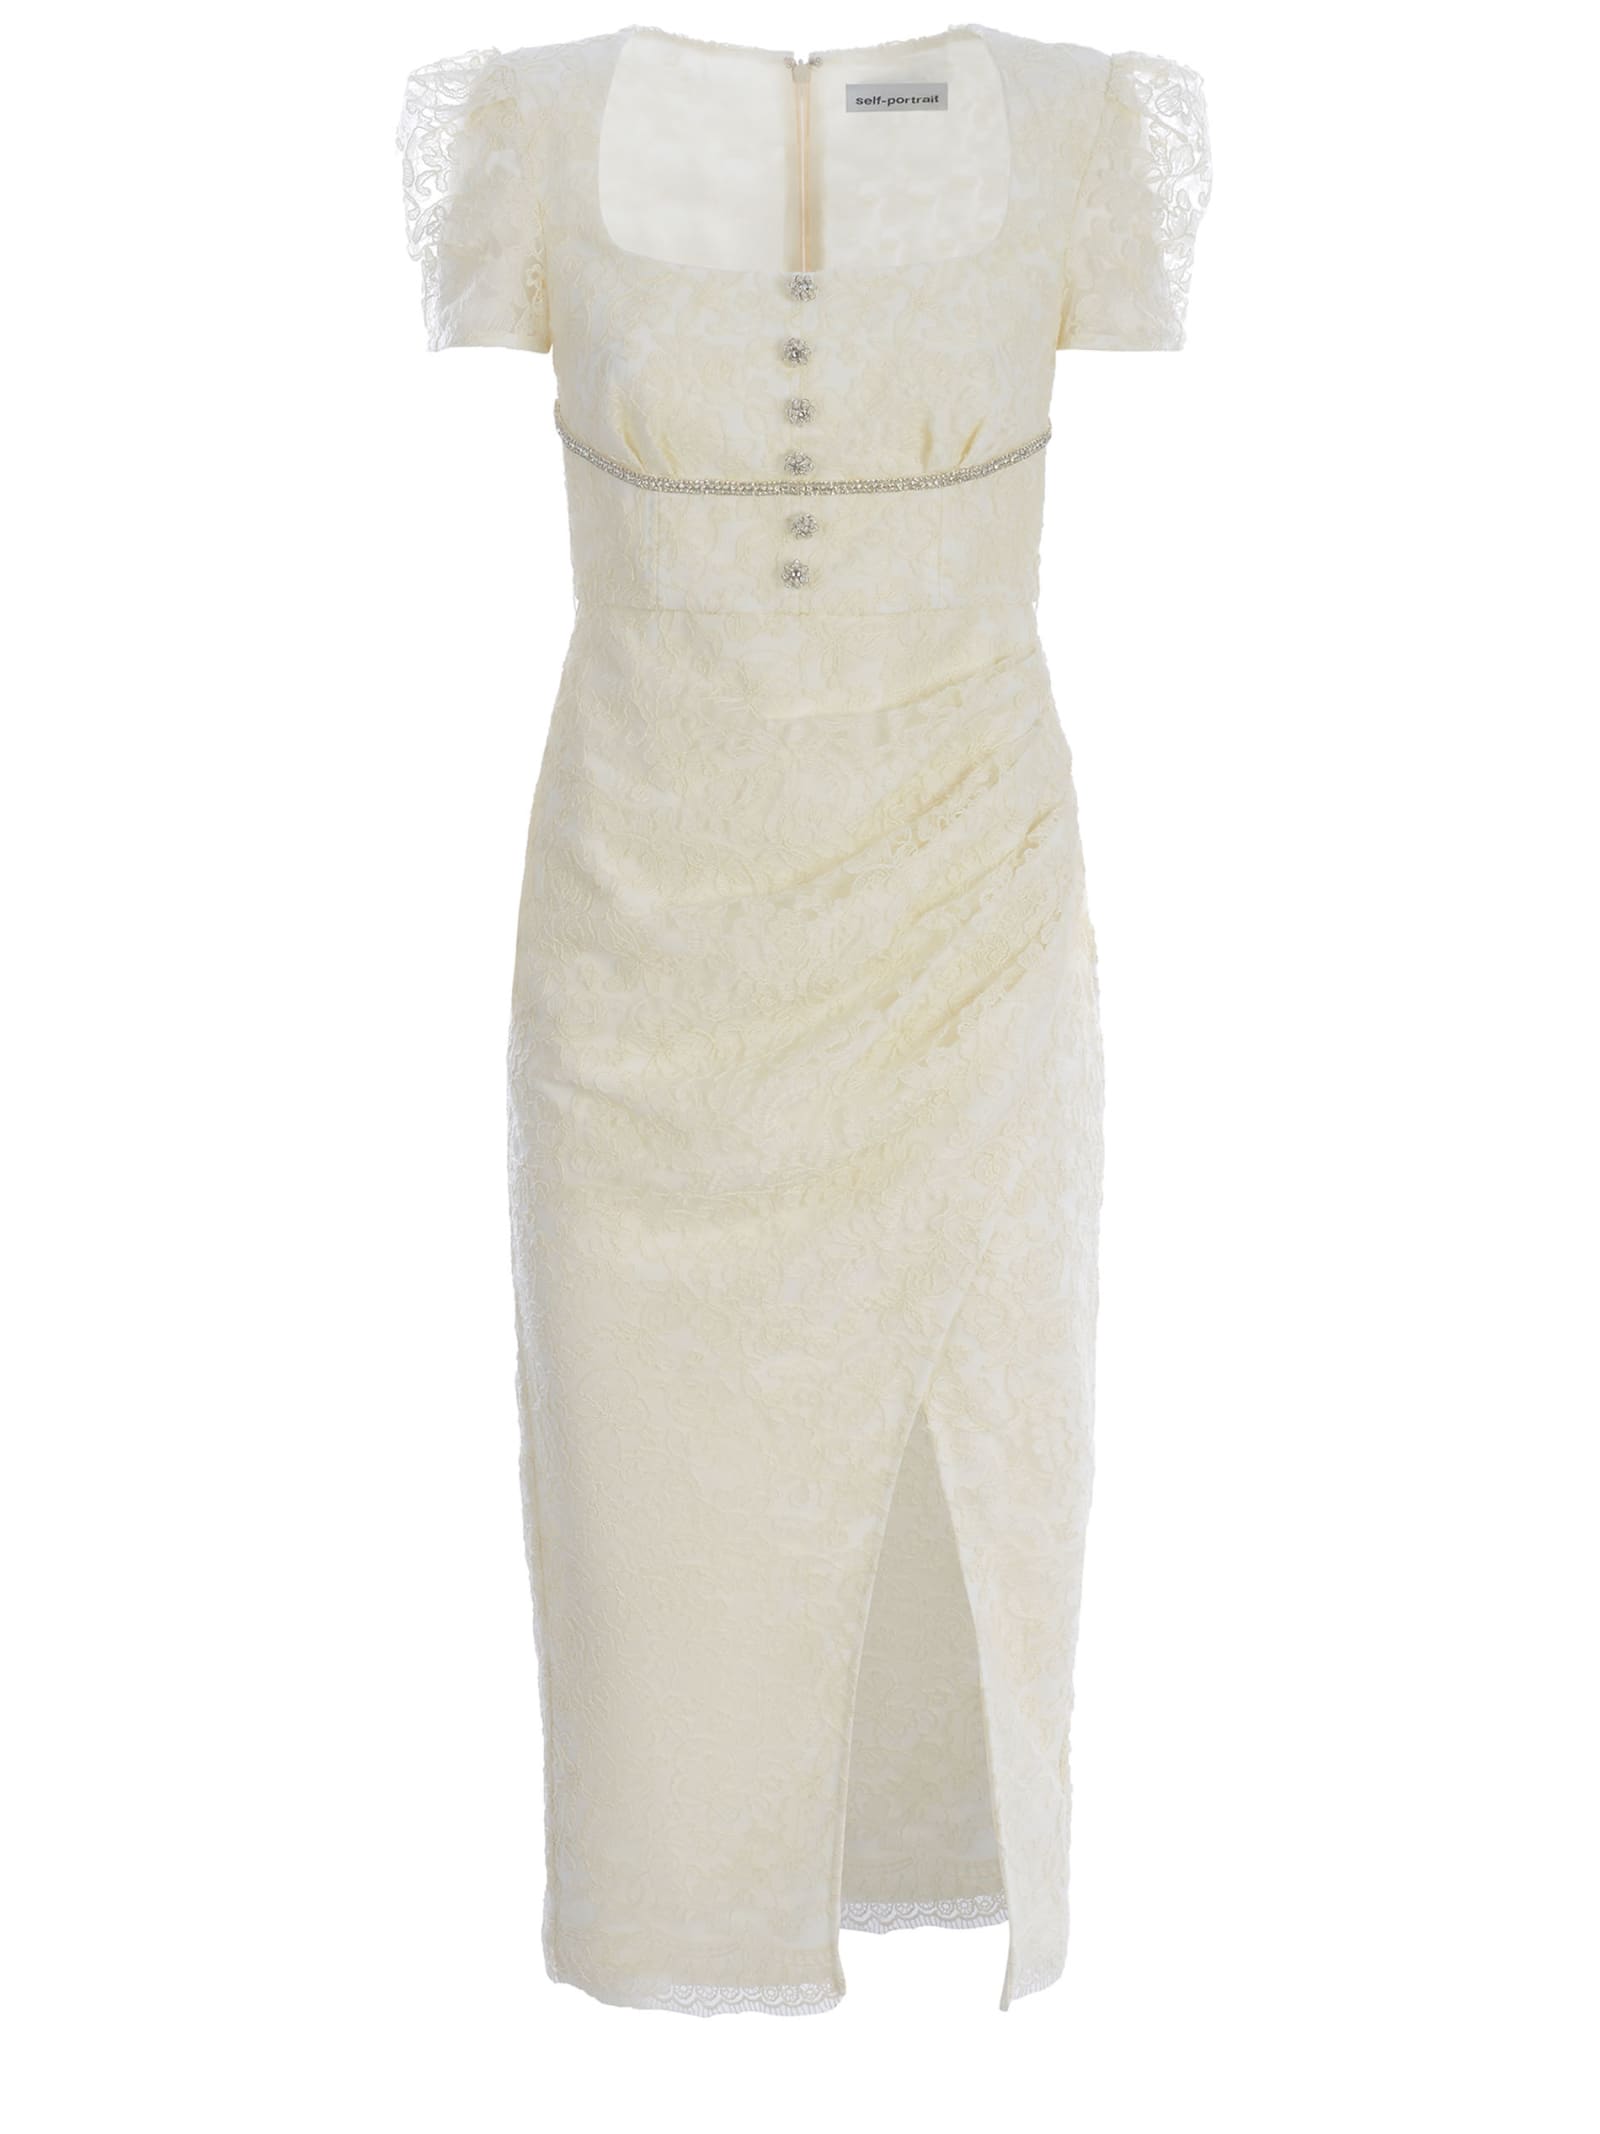 Self-portrait Dress  Made Of Lace In Crema